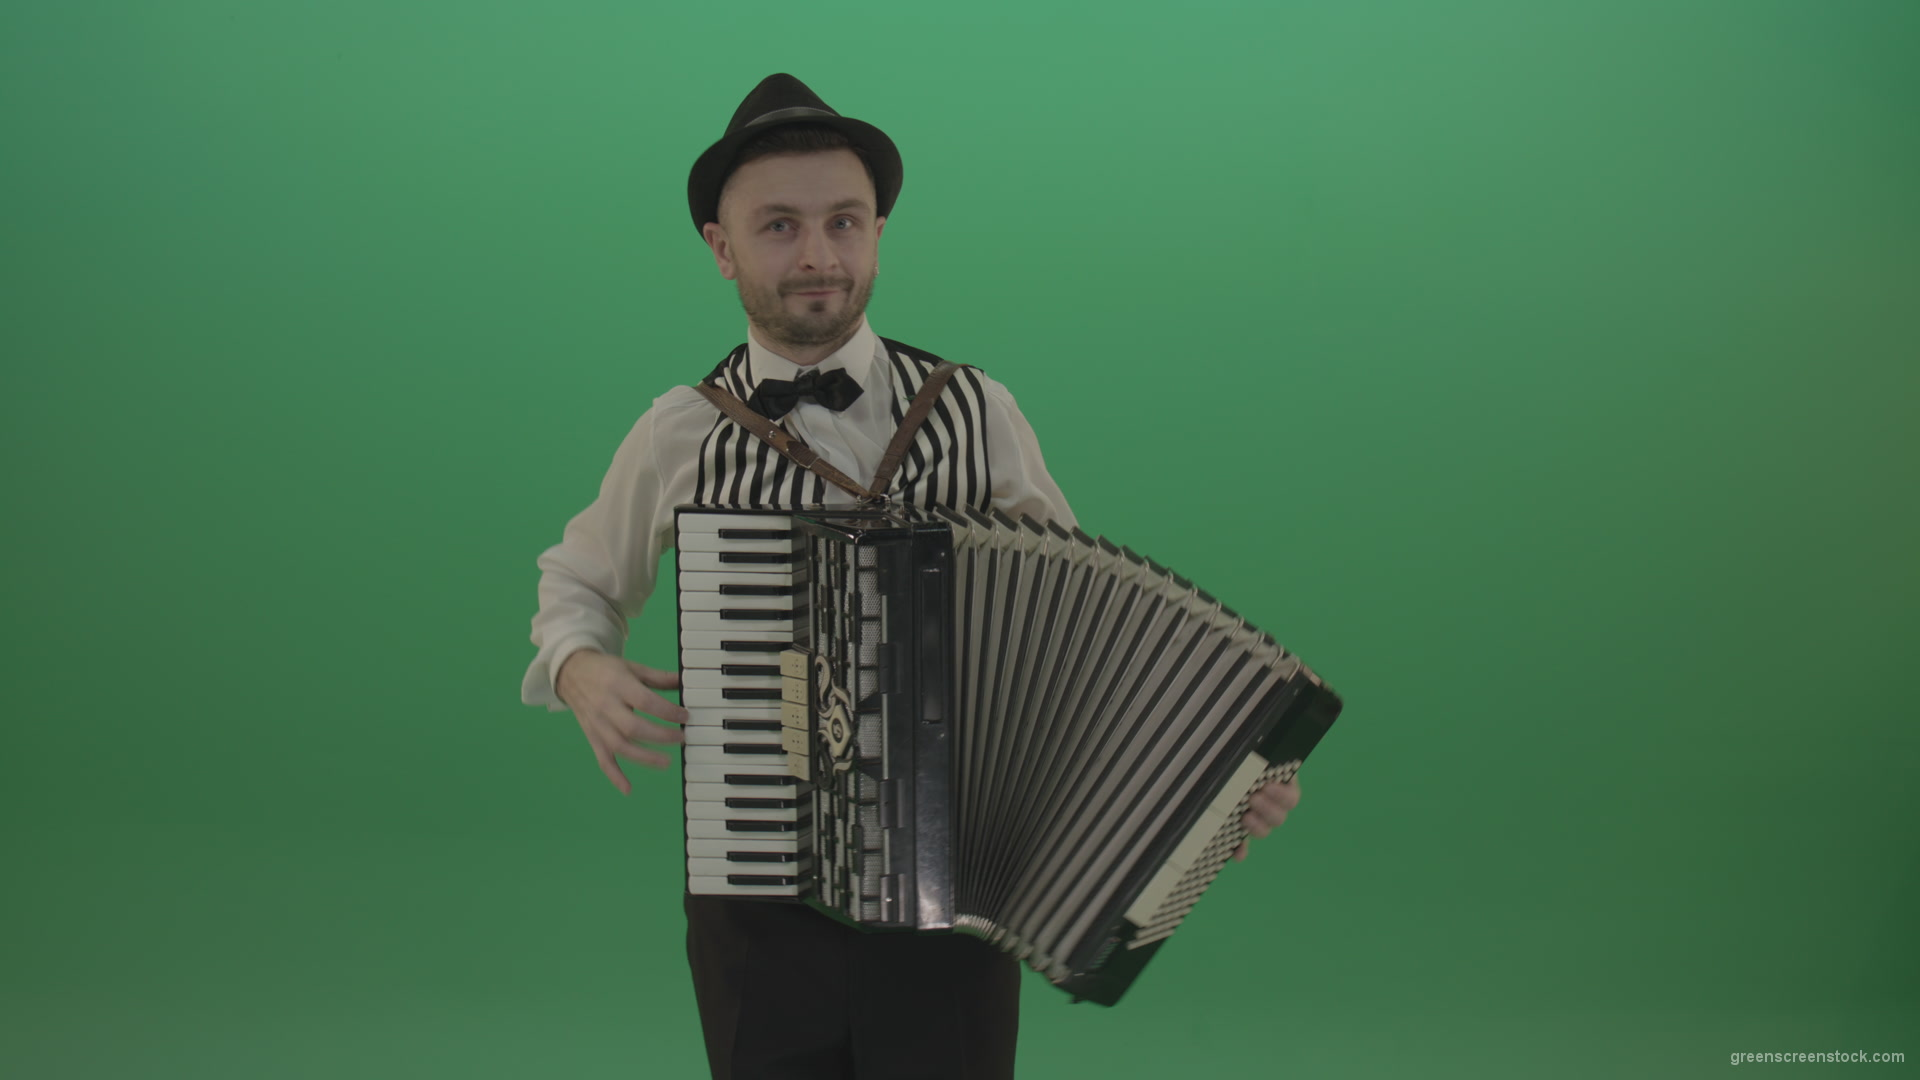 Virtuoso-player-man-with-Accordion-isolated-on-green-screen-in-front-view-1_005 Green Screen Stock